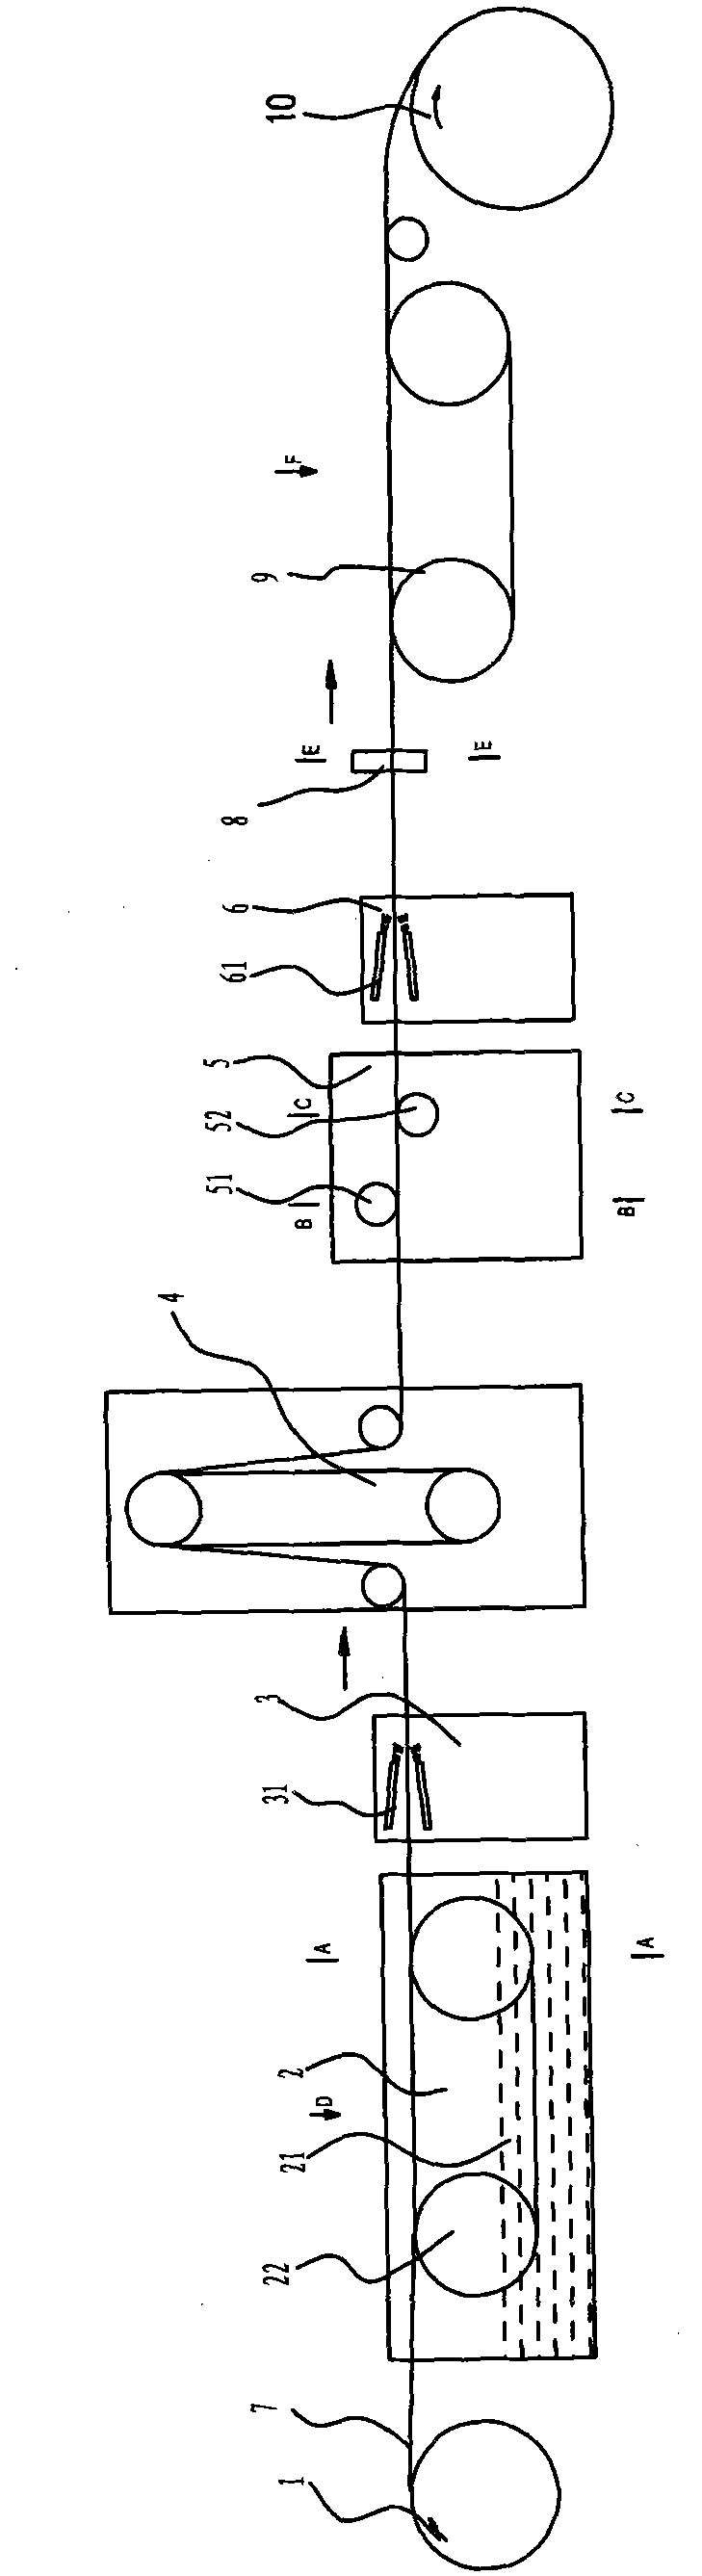 Continuous pickling and wiredrawing process of brass wire